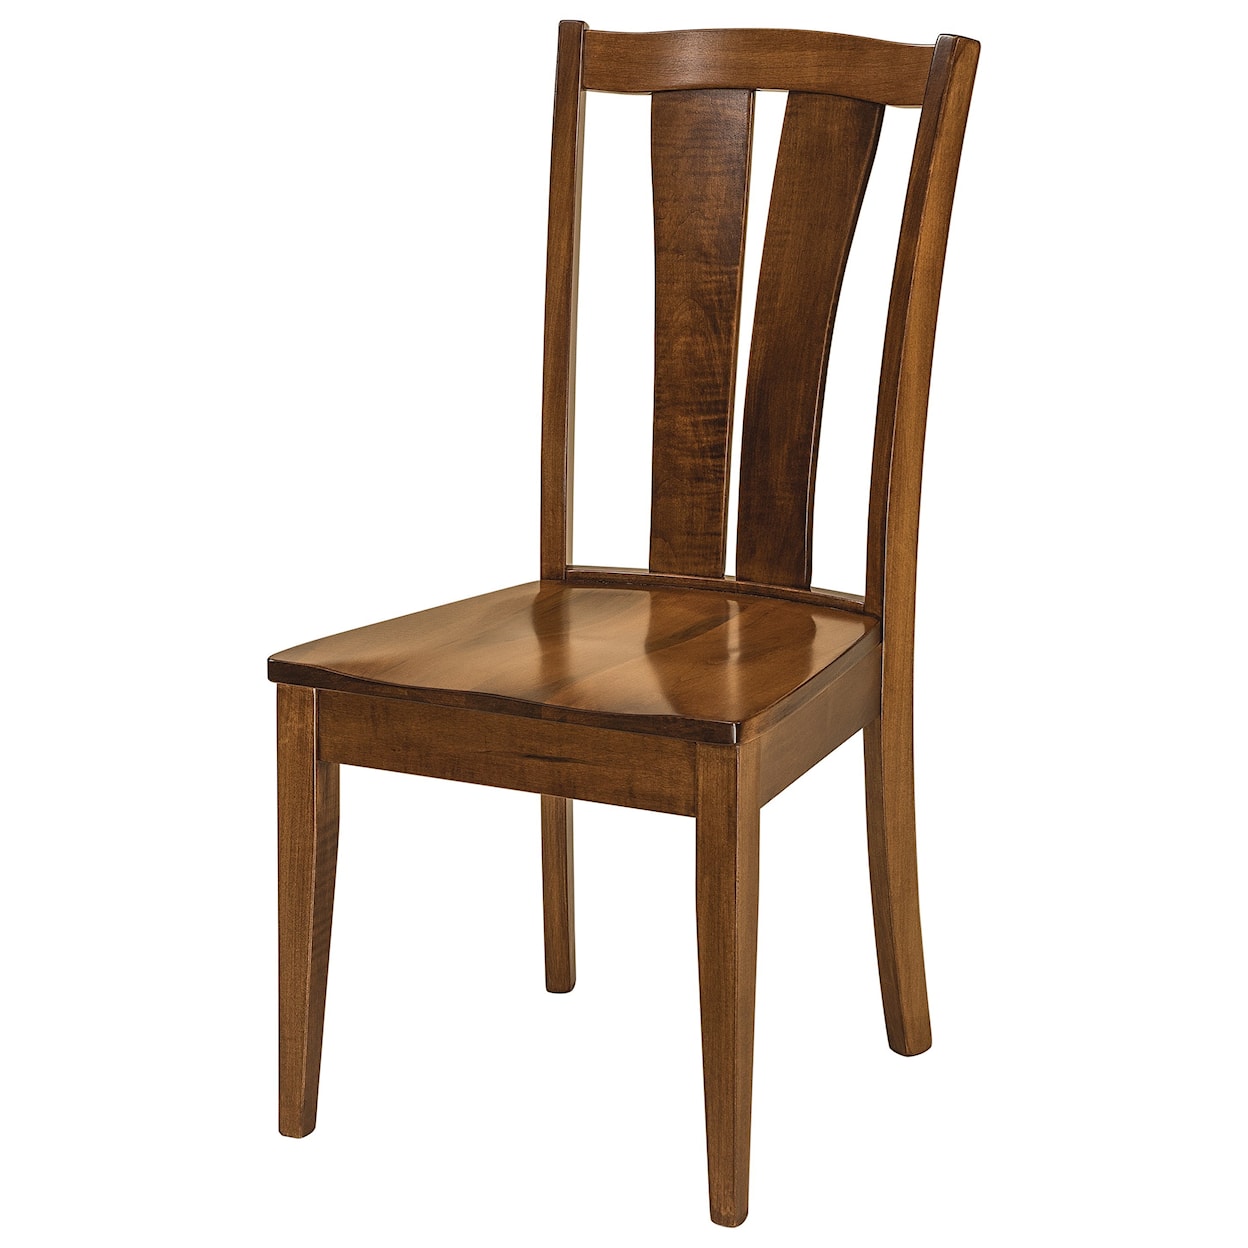 F&N Woodworking Brawley Side Chair - Leather Seat